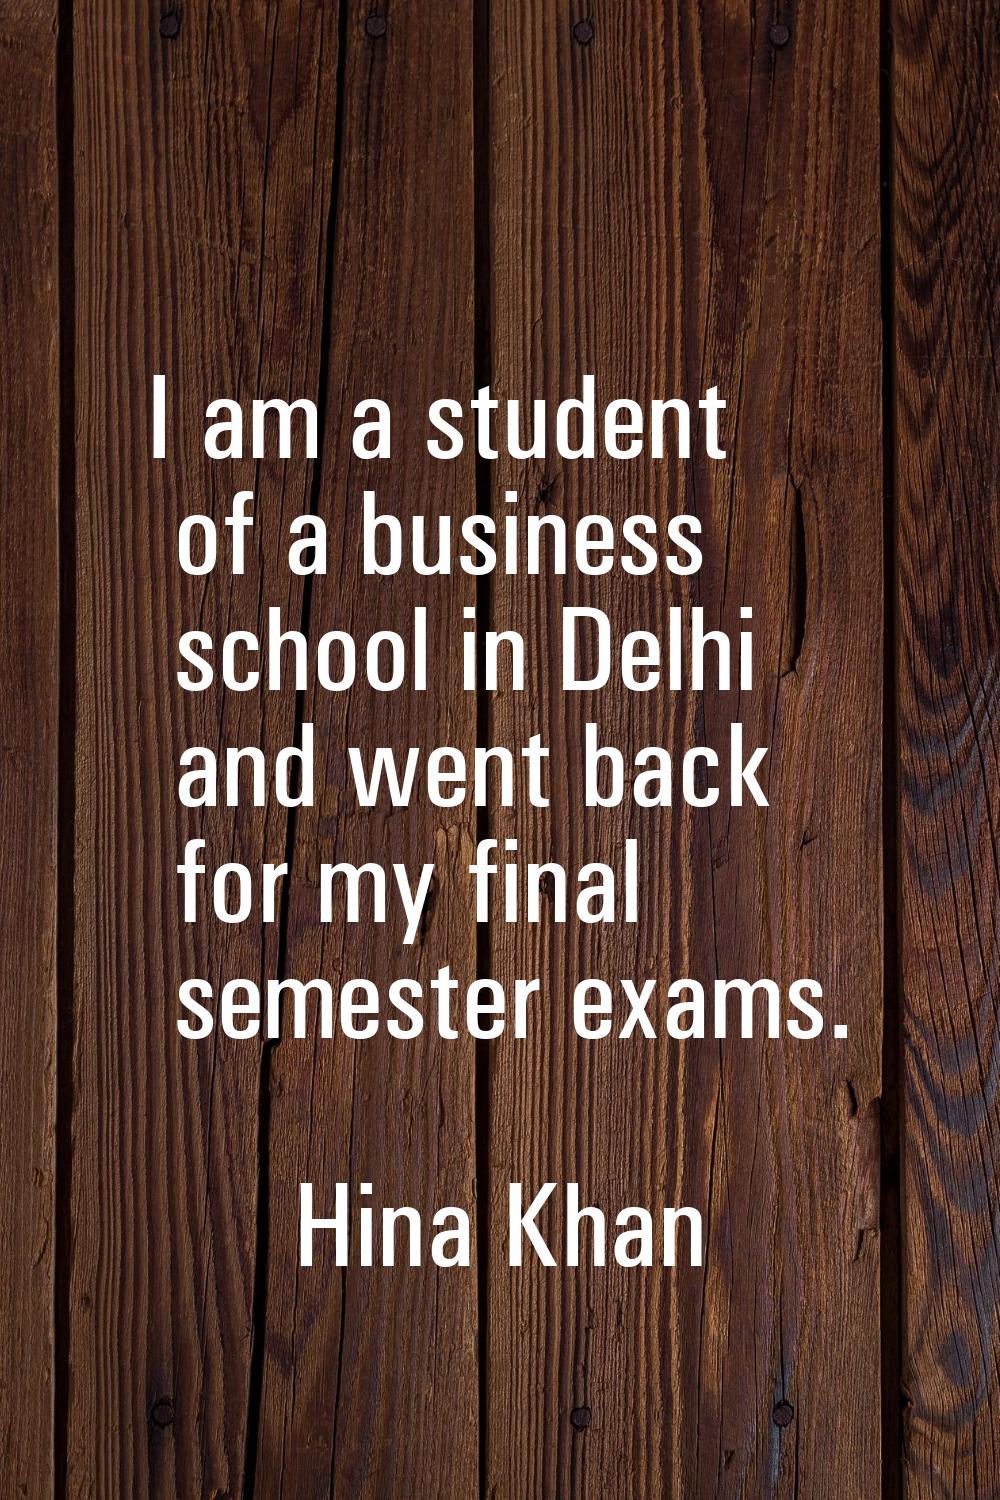 I am a student of a business school in Delhi and went back for my final semester exams.